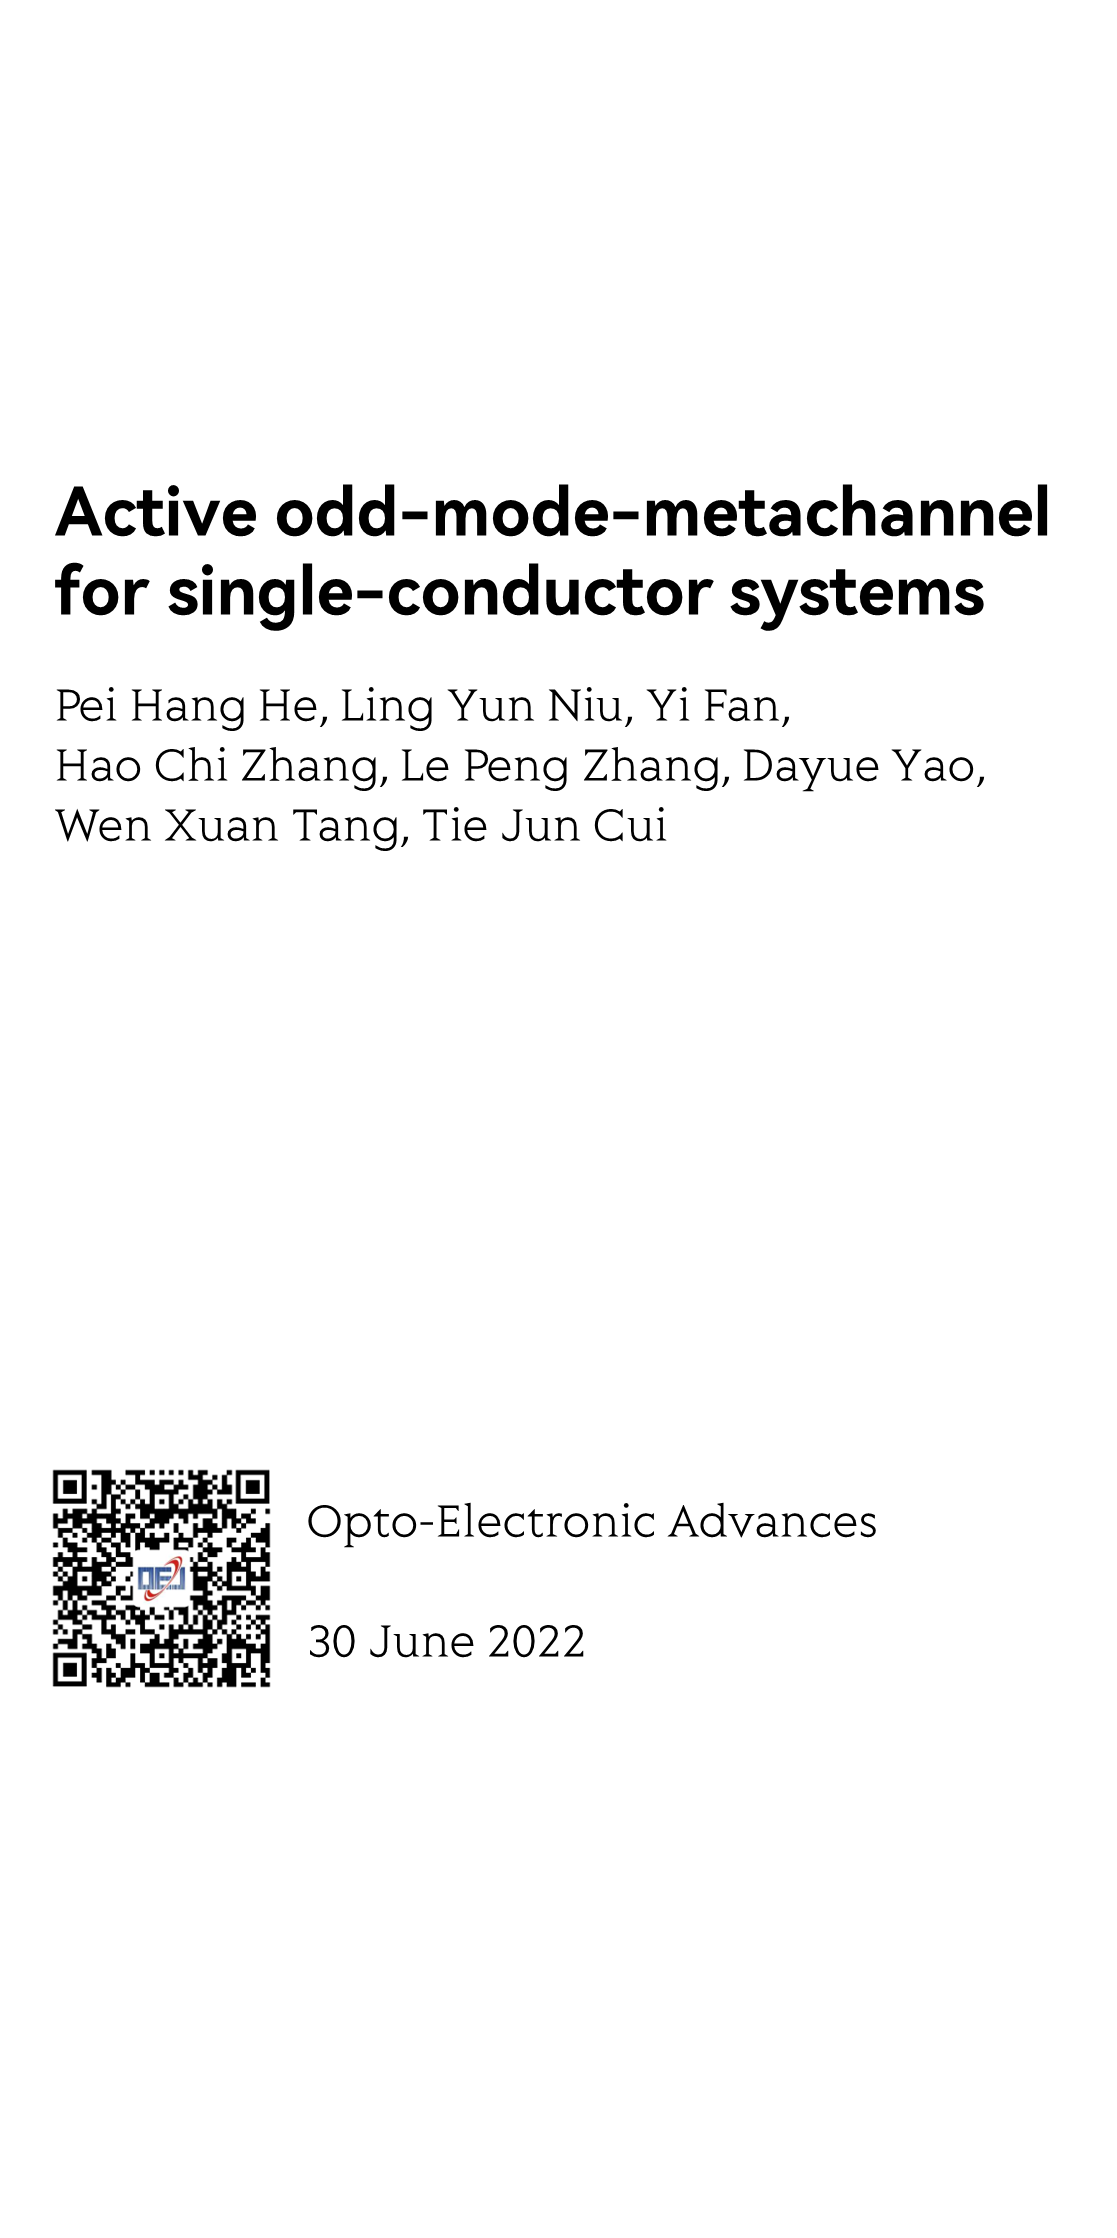 Active odd-mode-metachannel for single-conductor systems_1